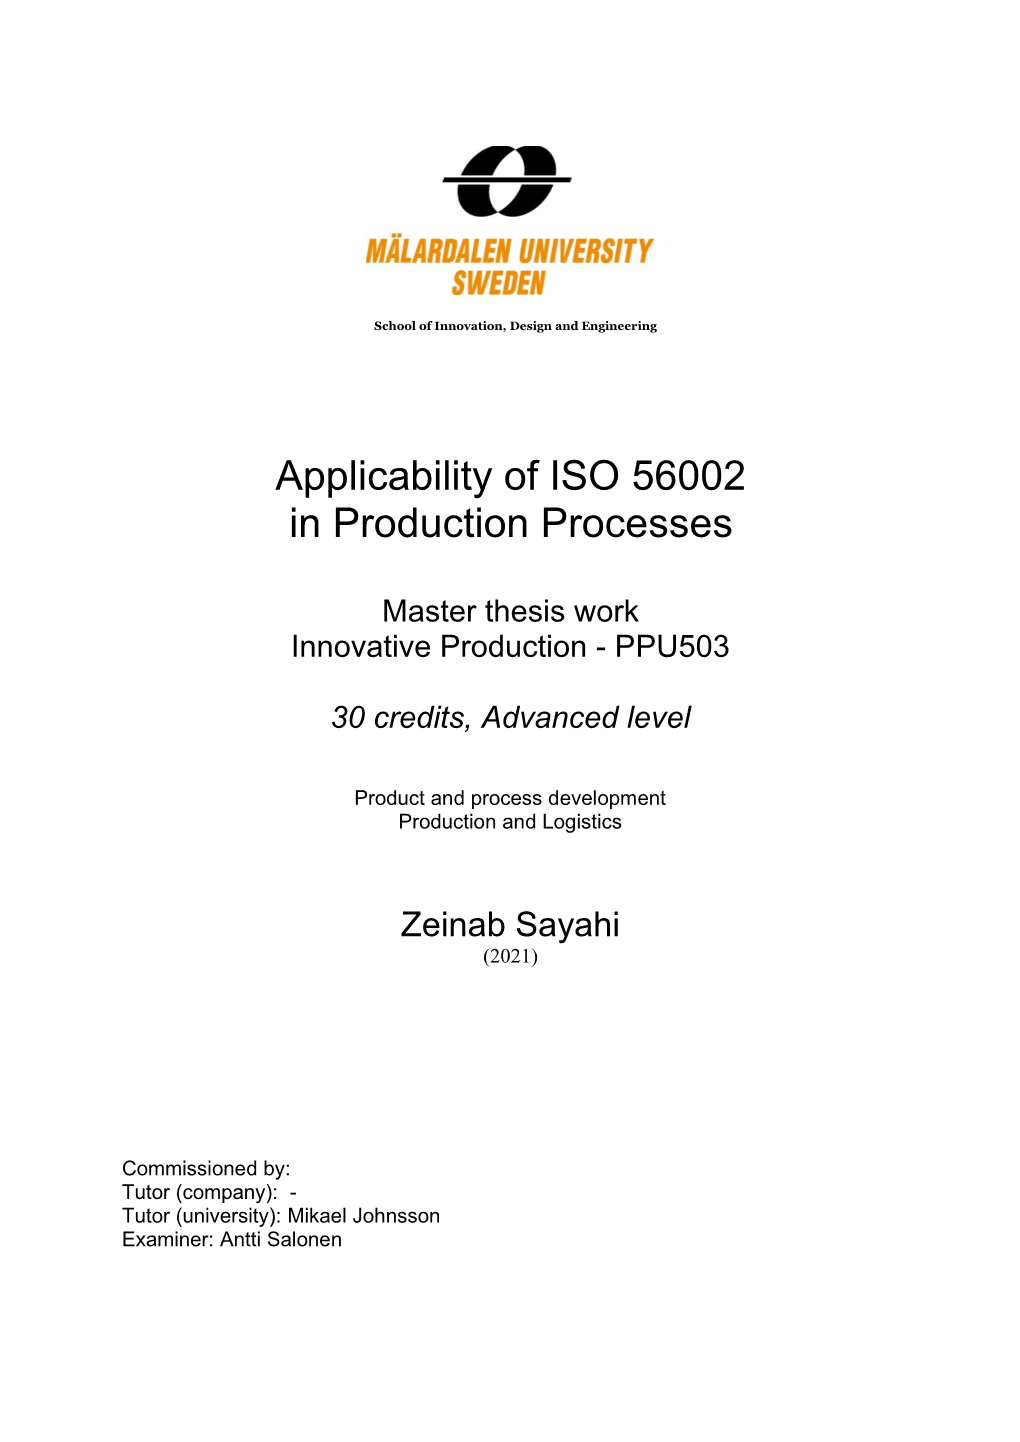 Applicability of ISO 56002 in Production Processes